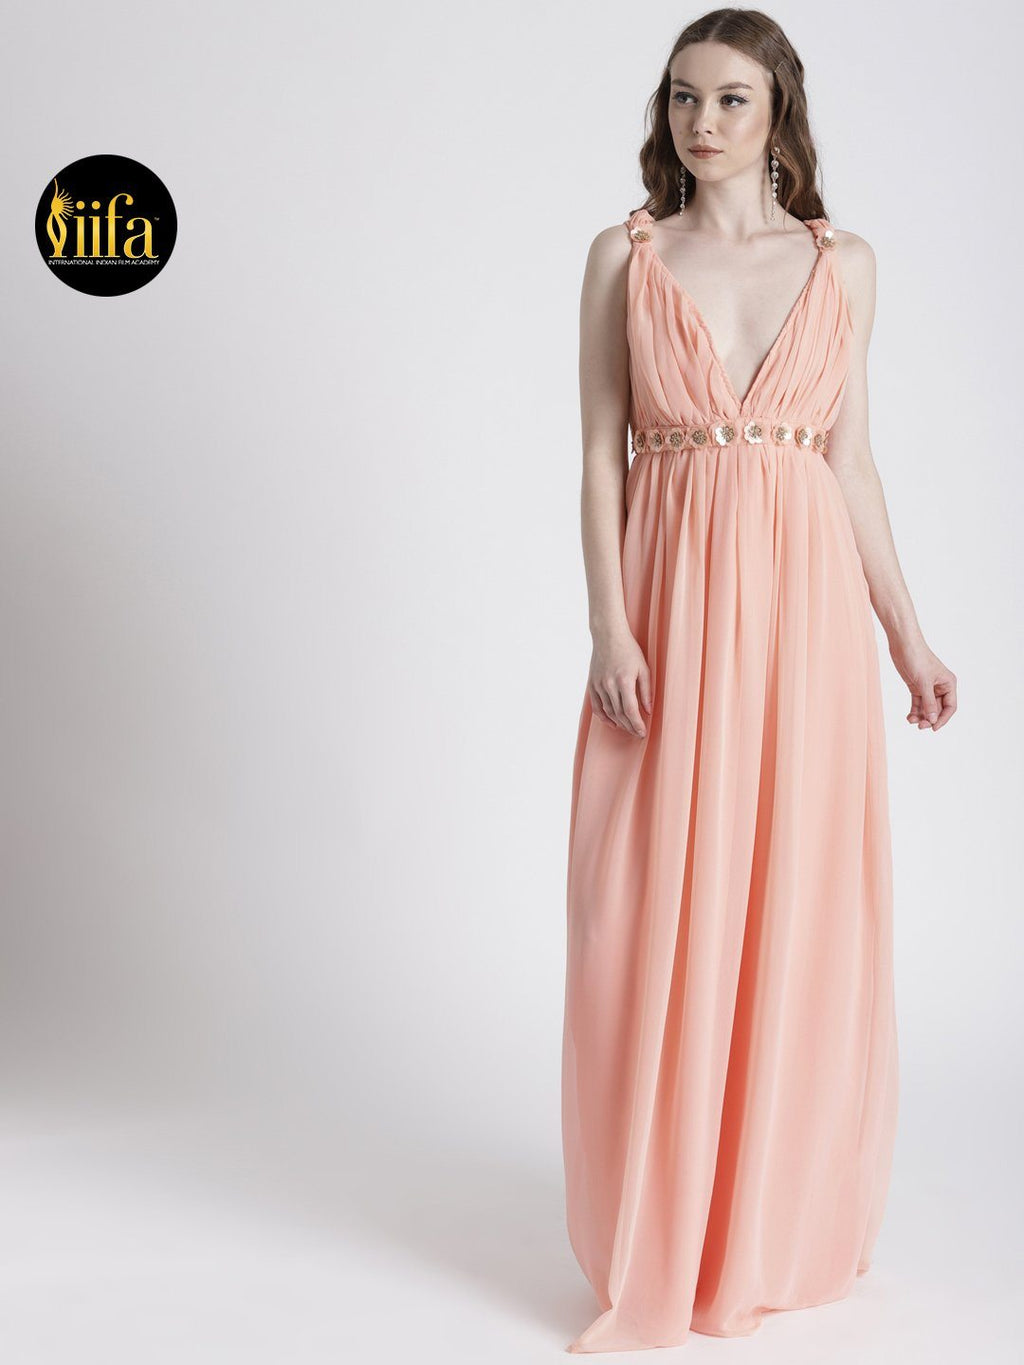 PEACH V-NECKLINE GOWN WITH BROOCH DETAIL